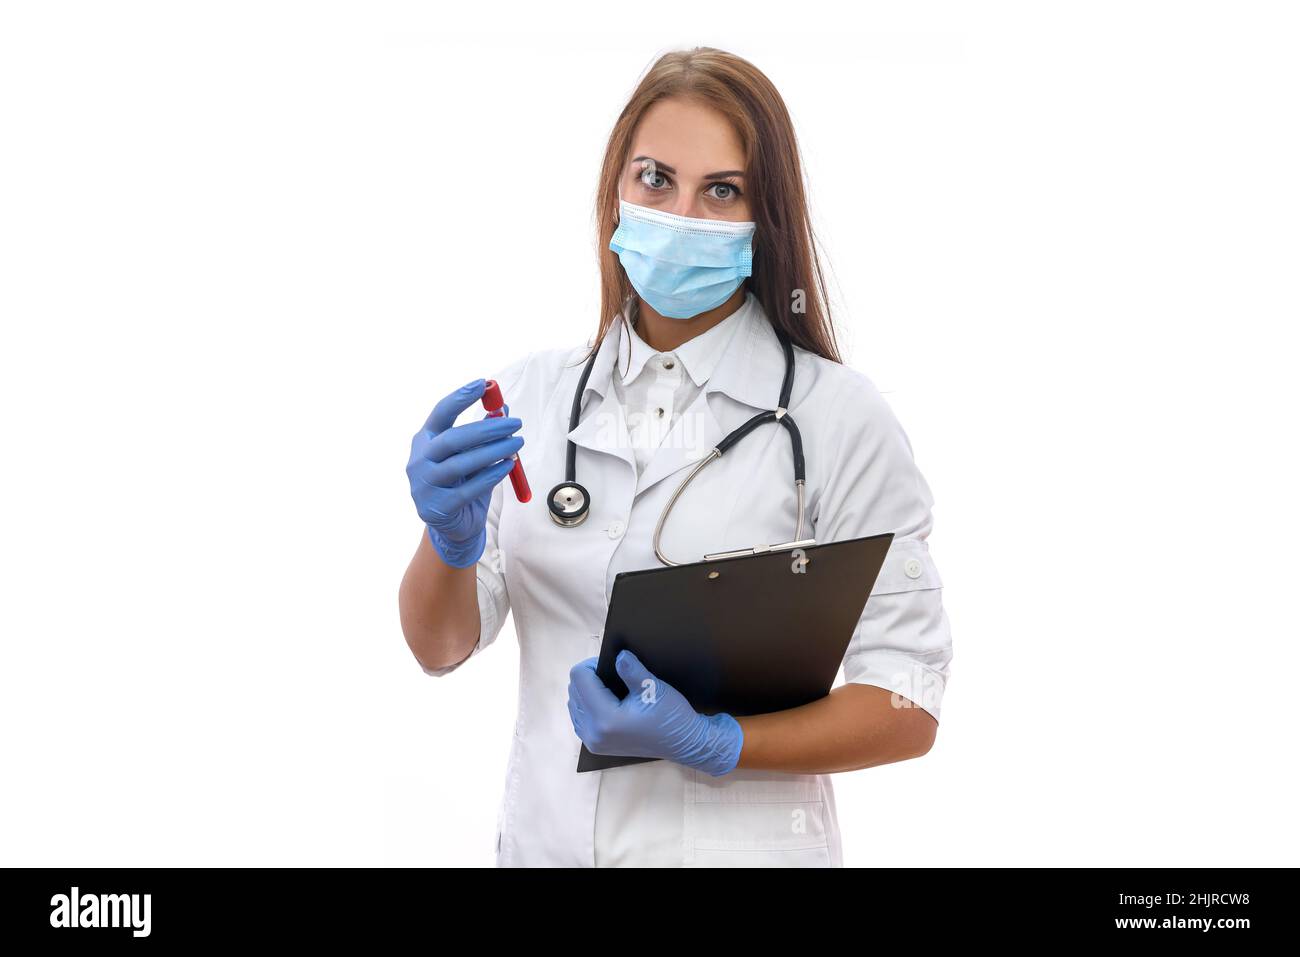 Attractive woman in medical uniform and protective mask holding red test tube isolated on white Stock Photo